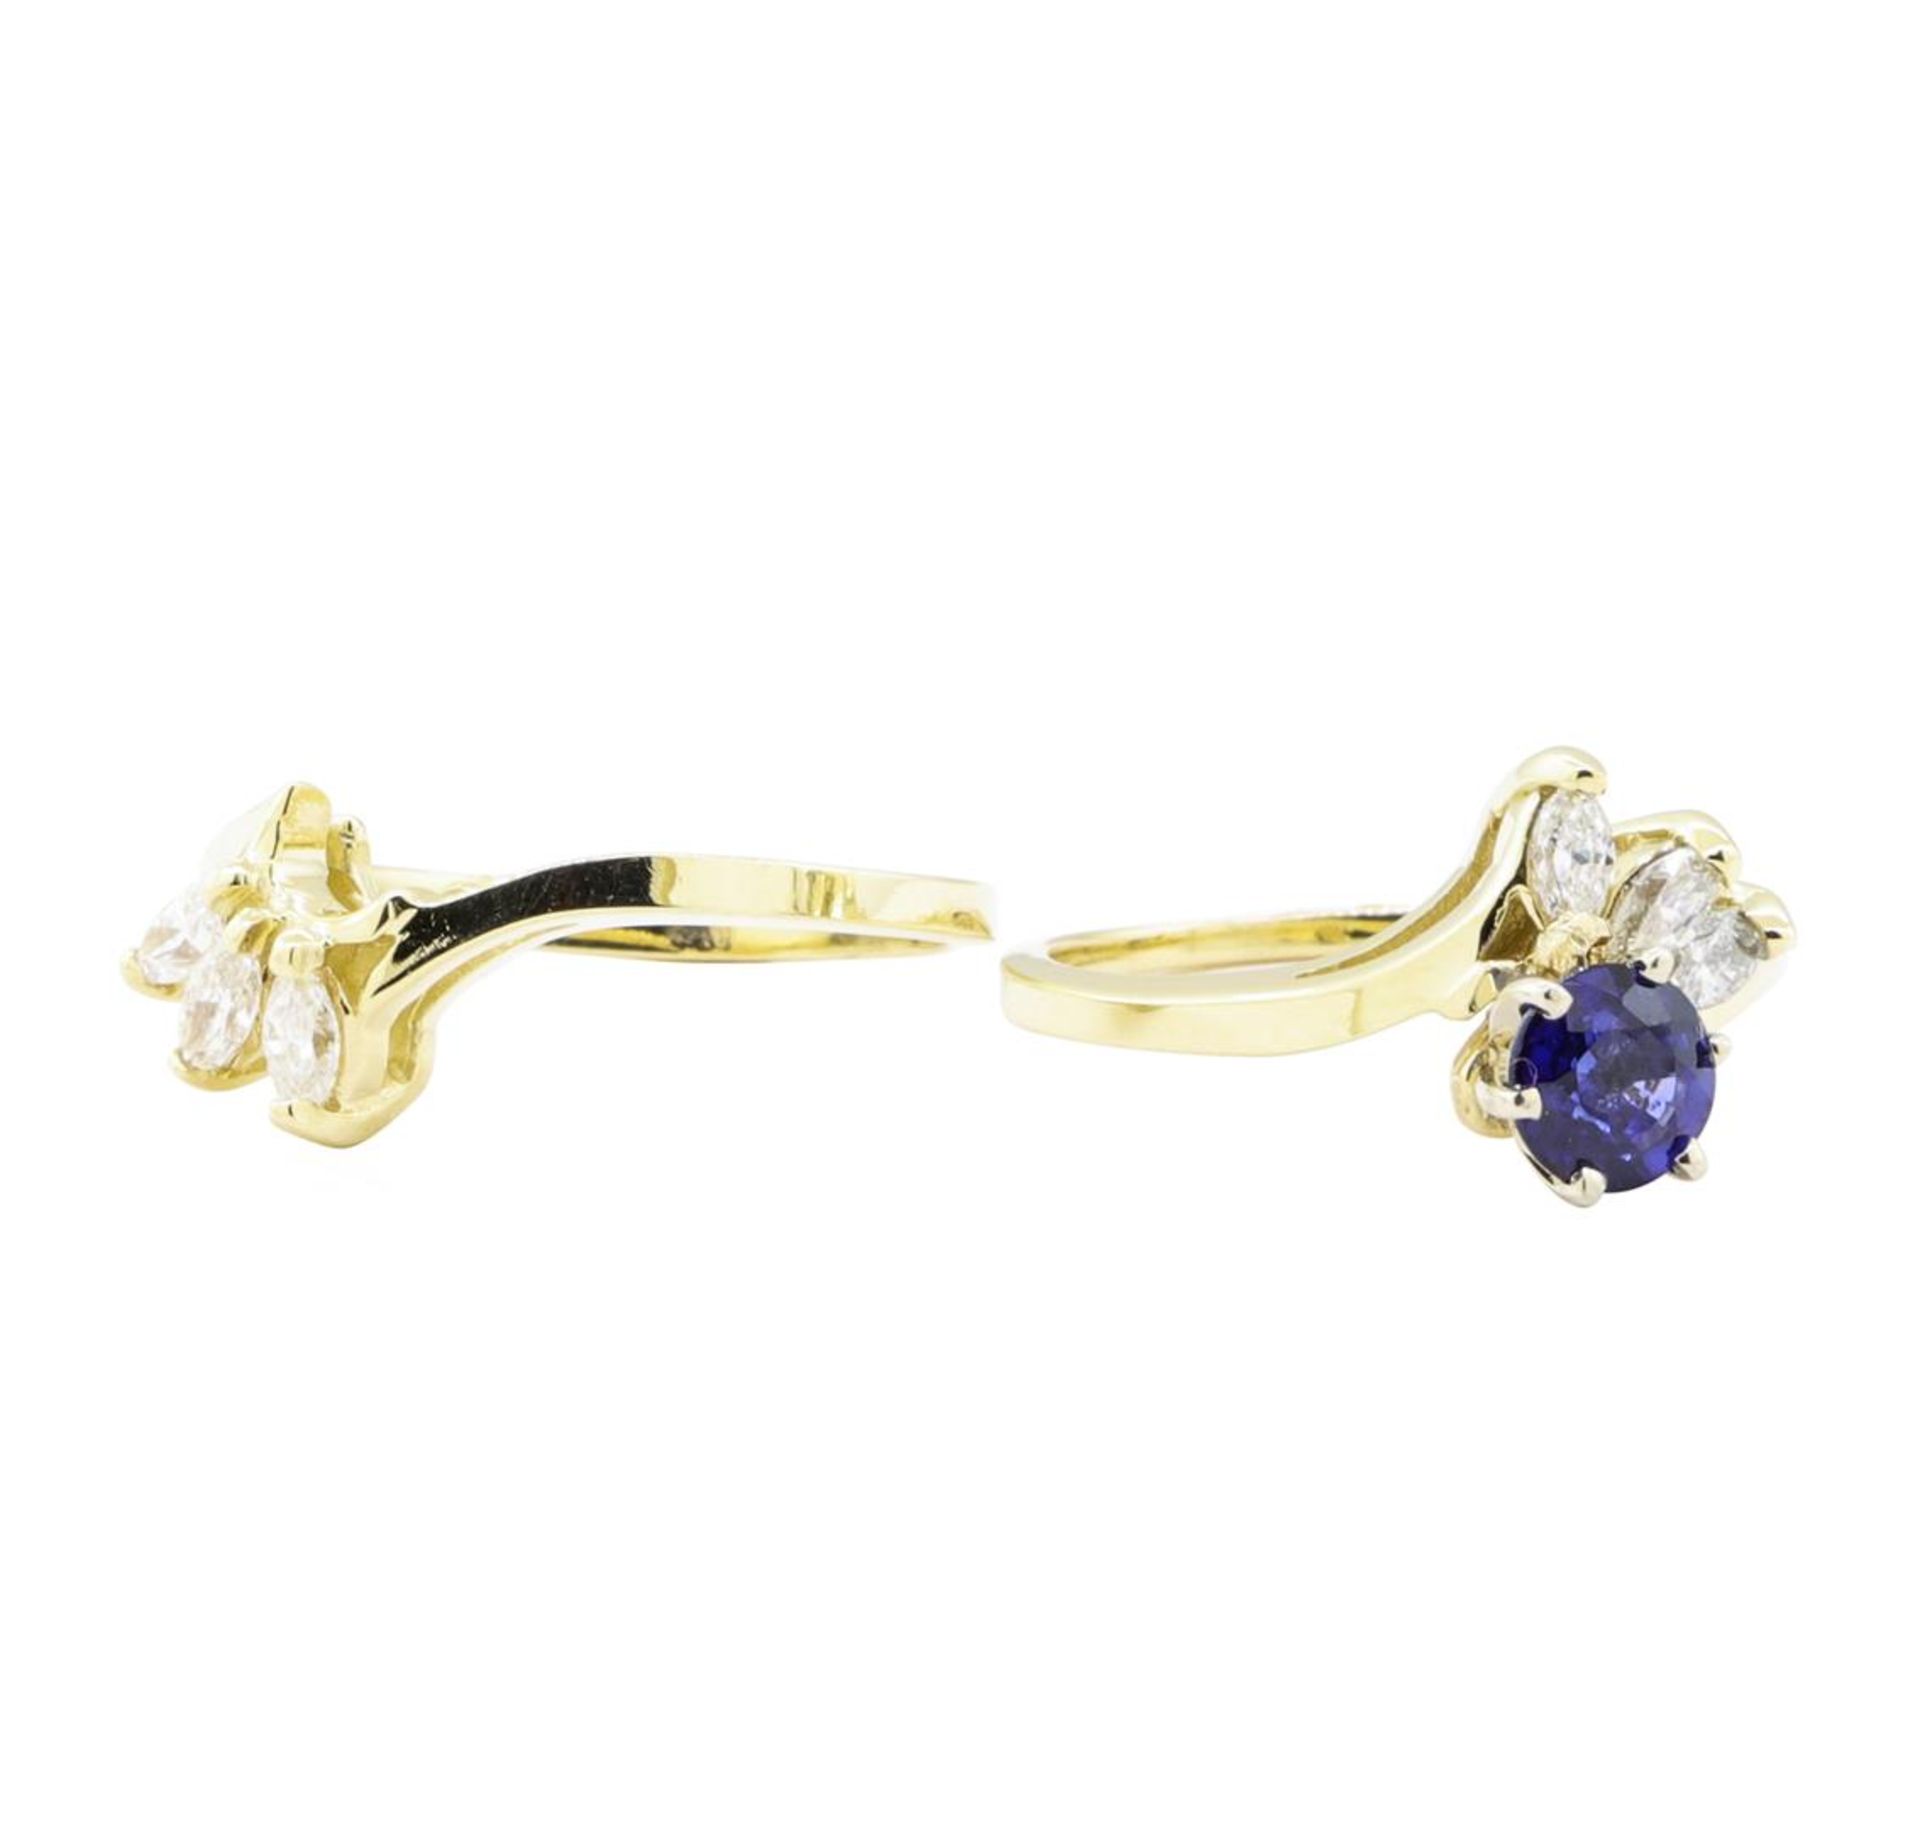 1.21 ctw Sapphire And Diamond Ring And Band - 14KT Yellow Gold - Image 3 of 4